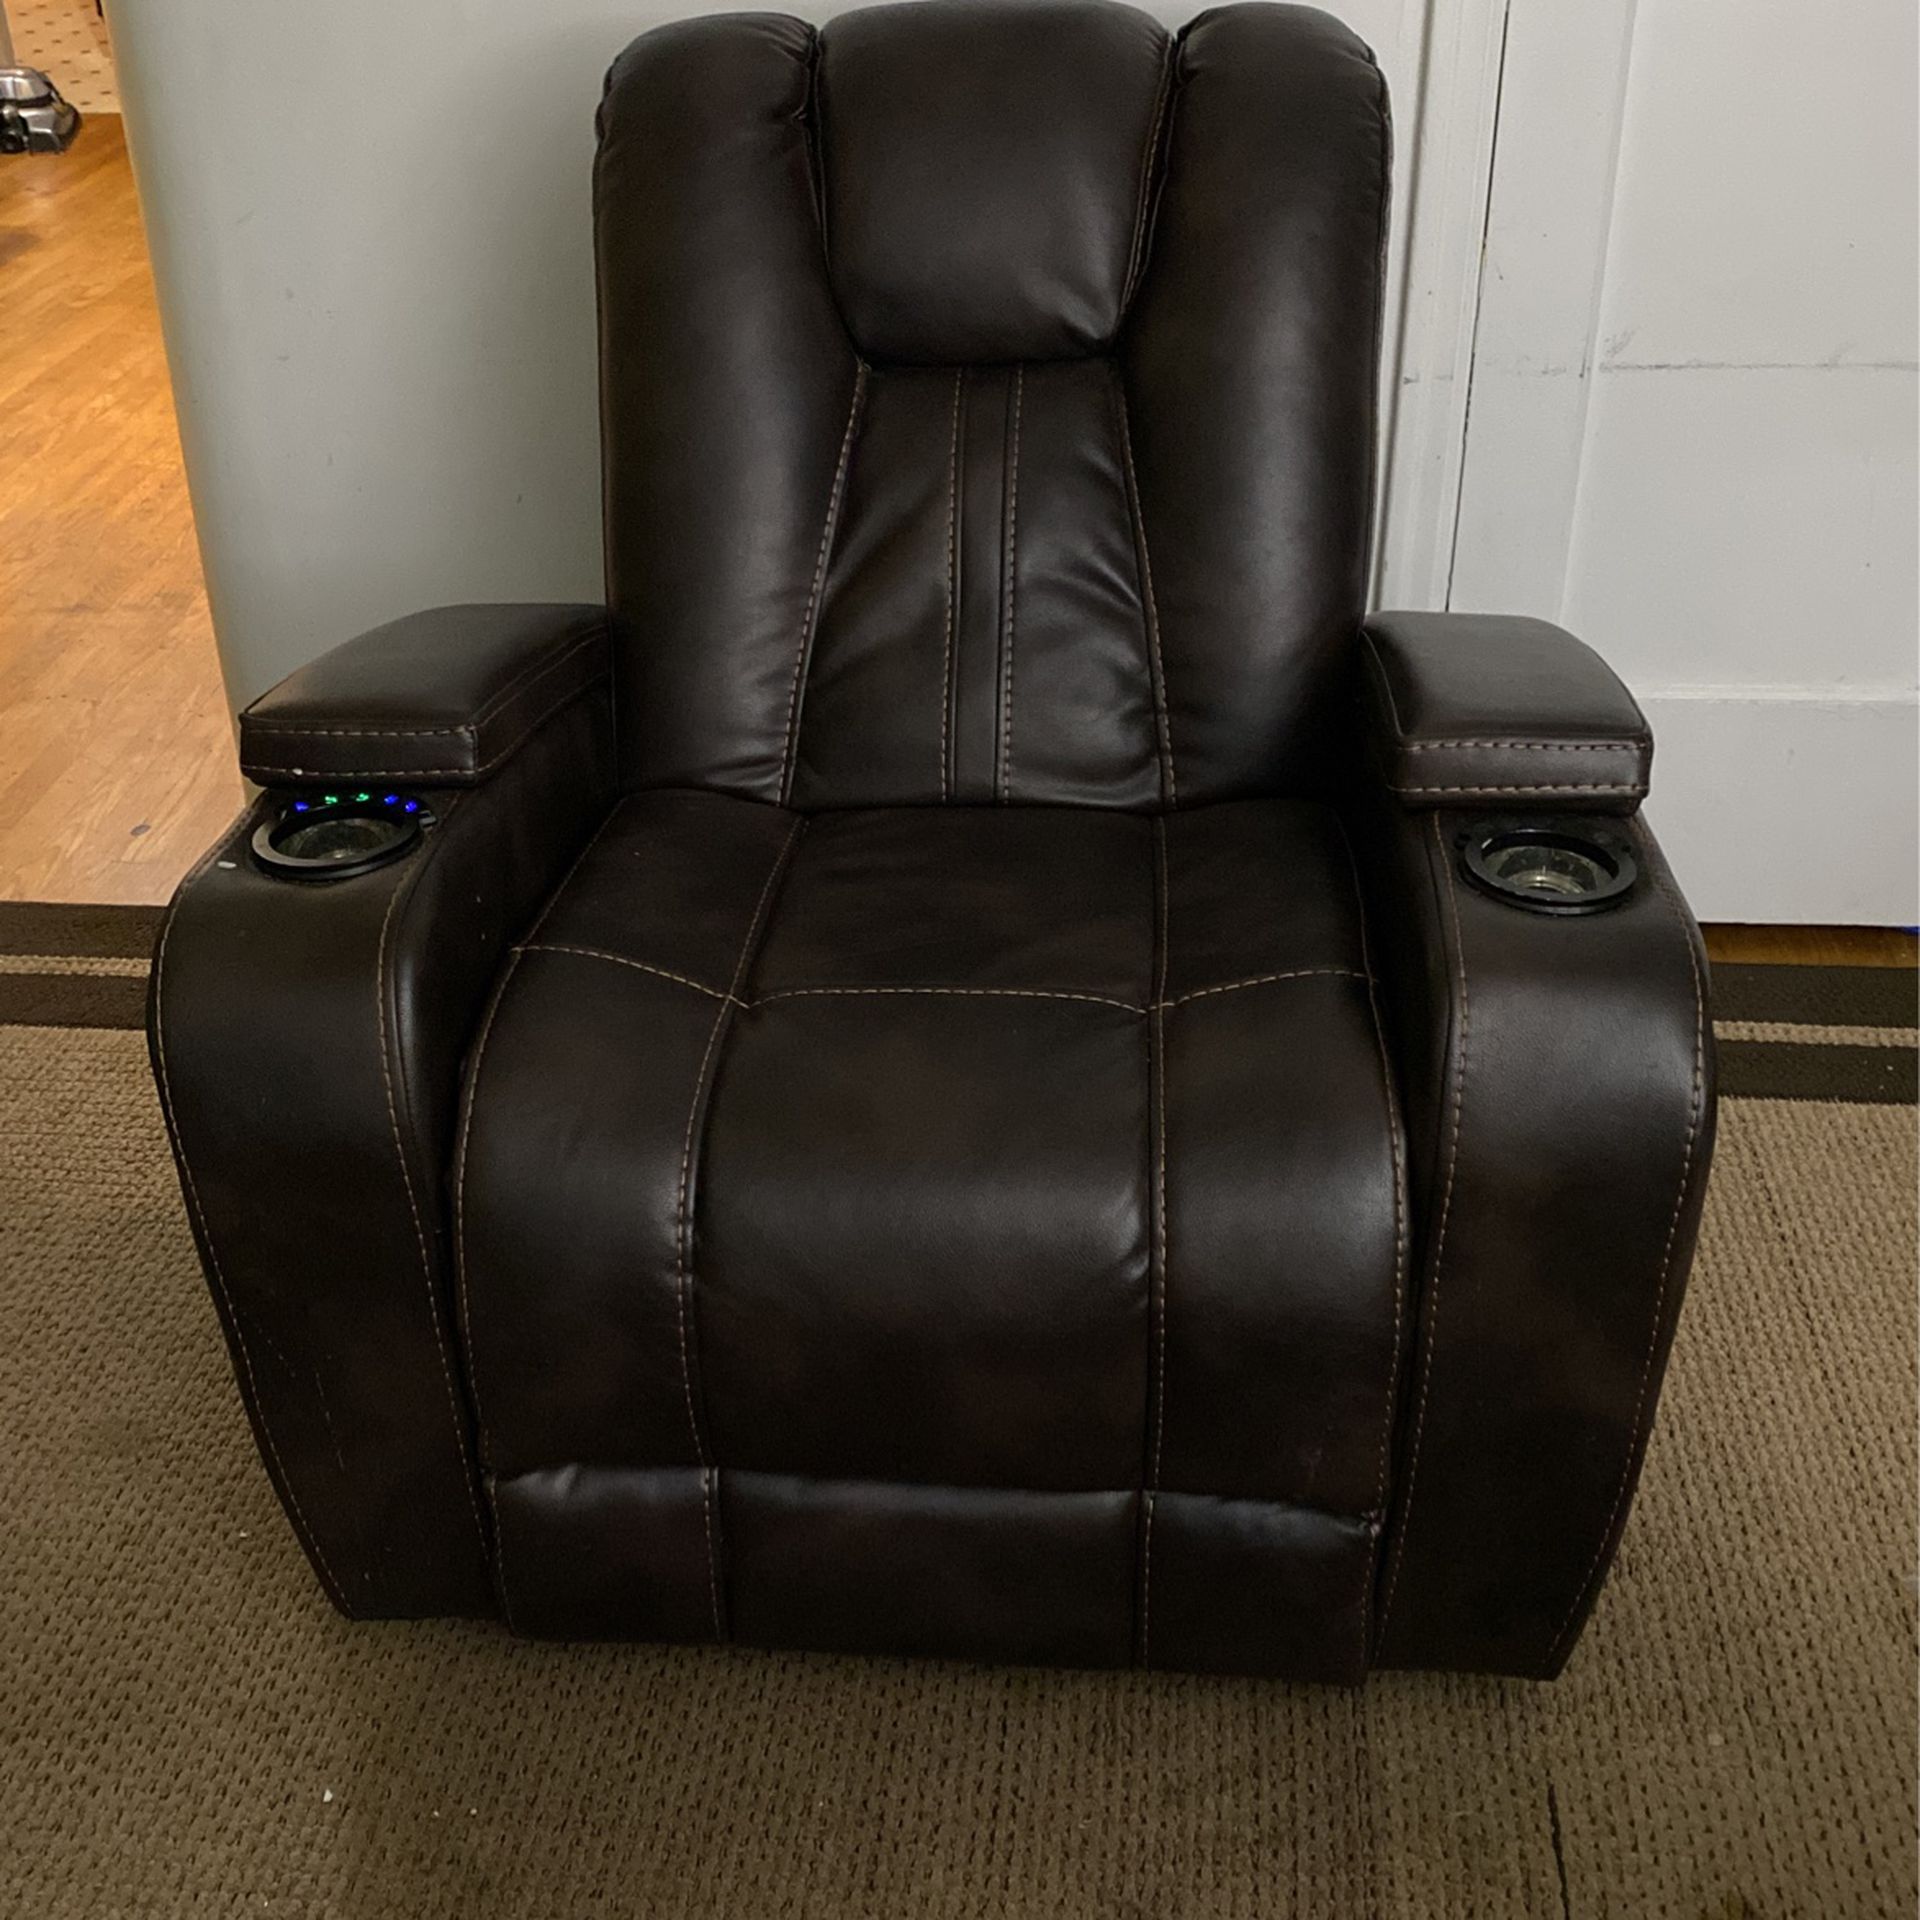 brown leather recliner chair with light up coaster and USB charger in arm rest 